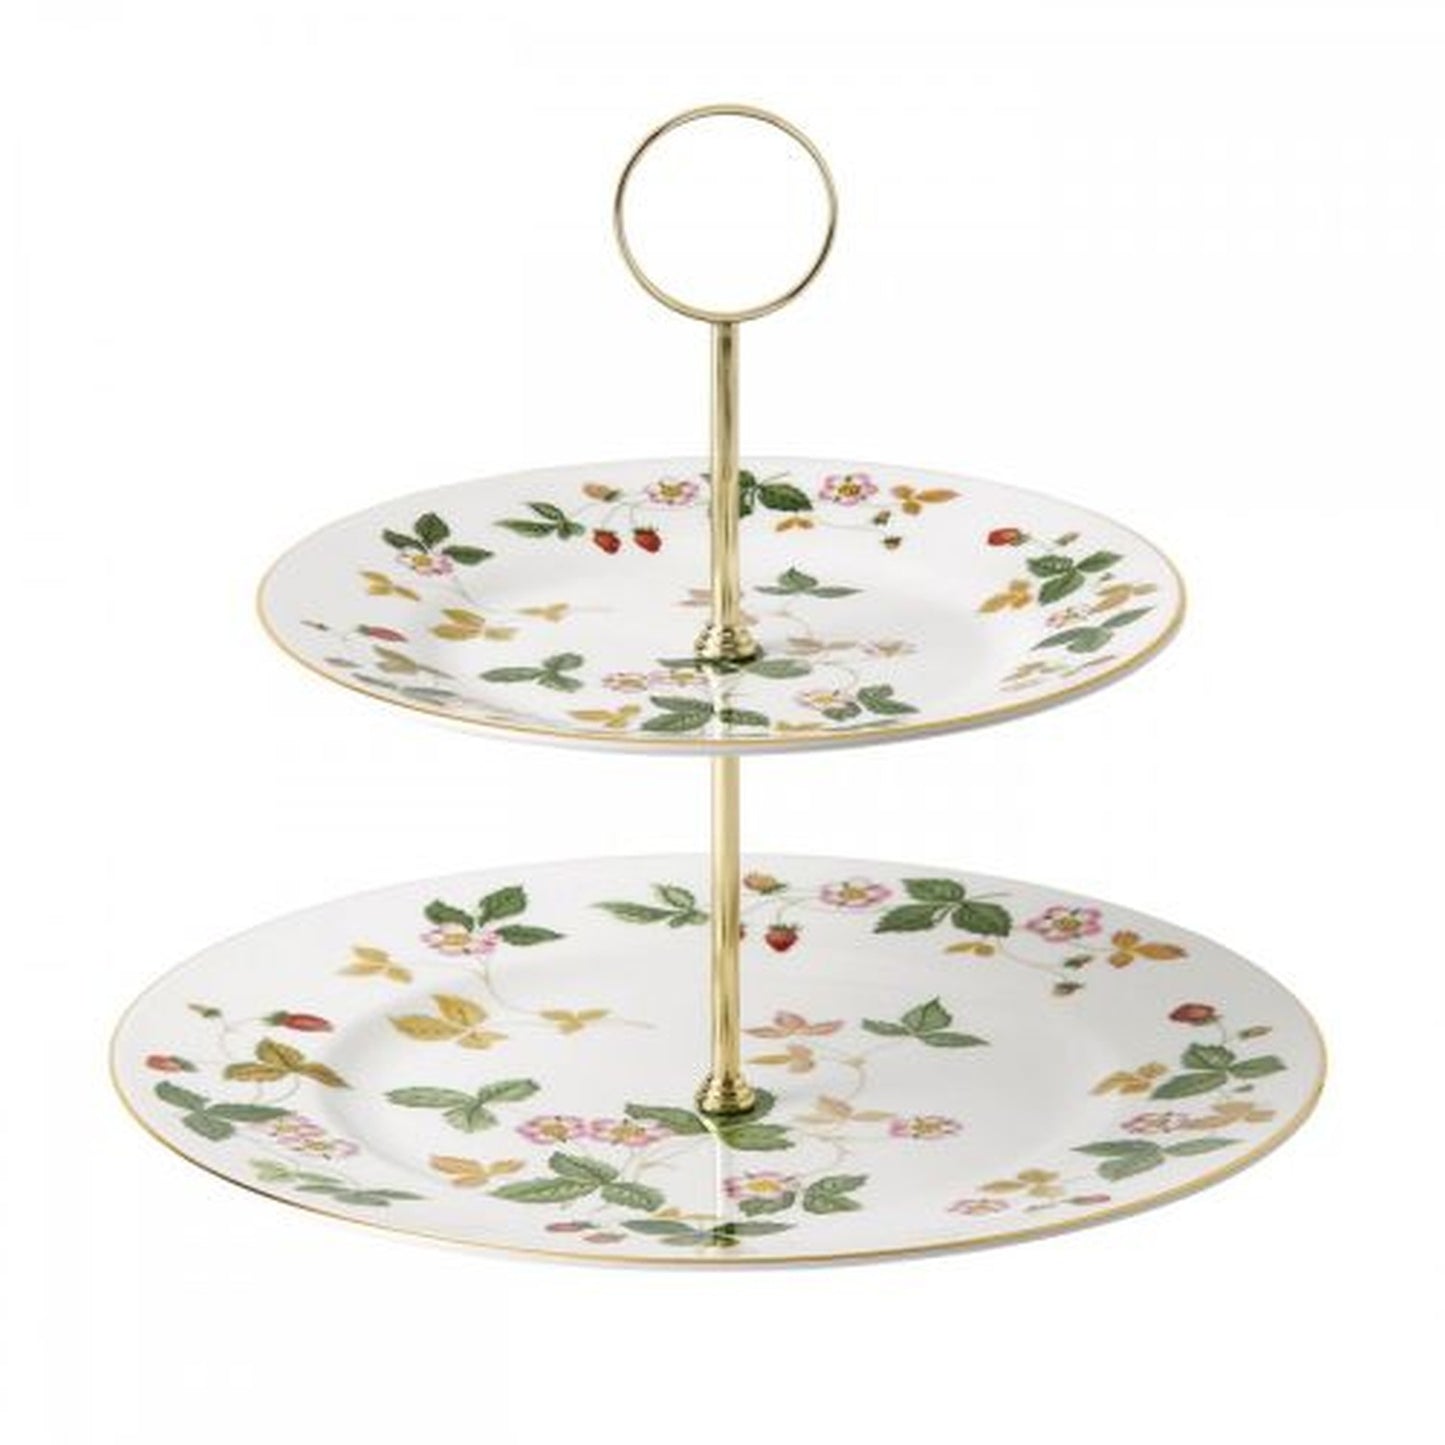 Wedgwood Wild Strawberry Two-Tier Cake Stand